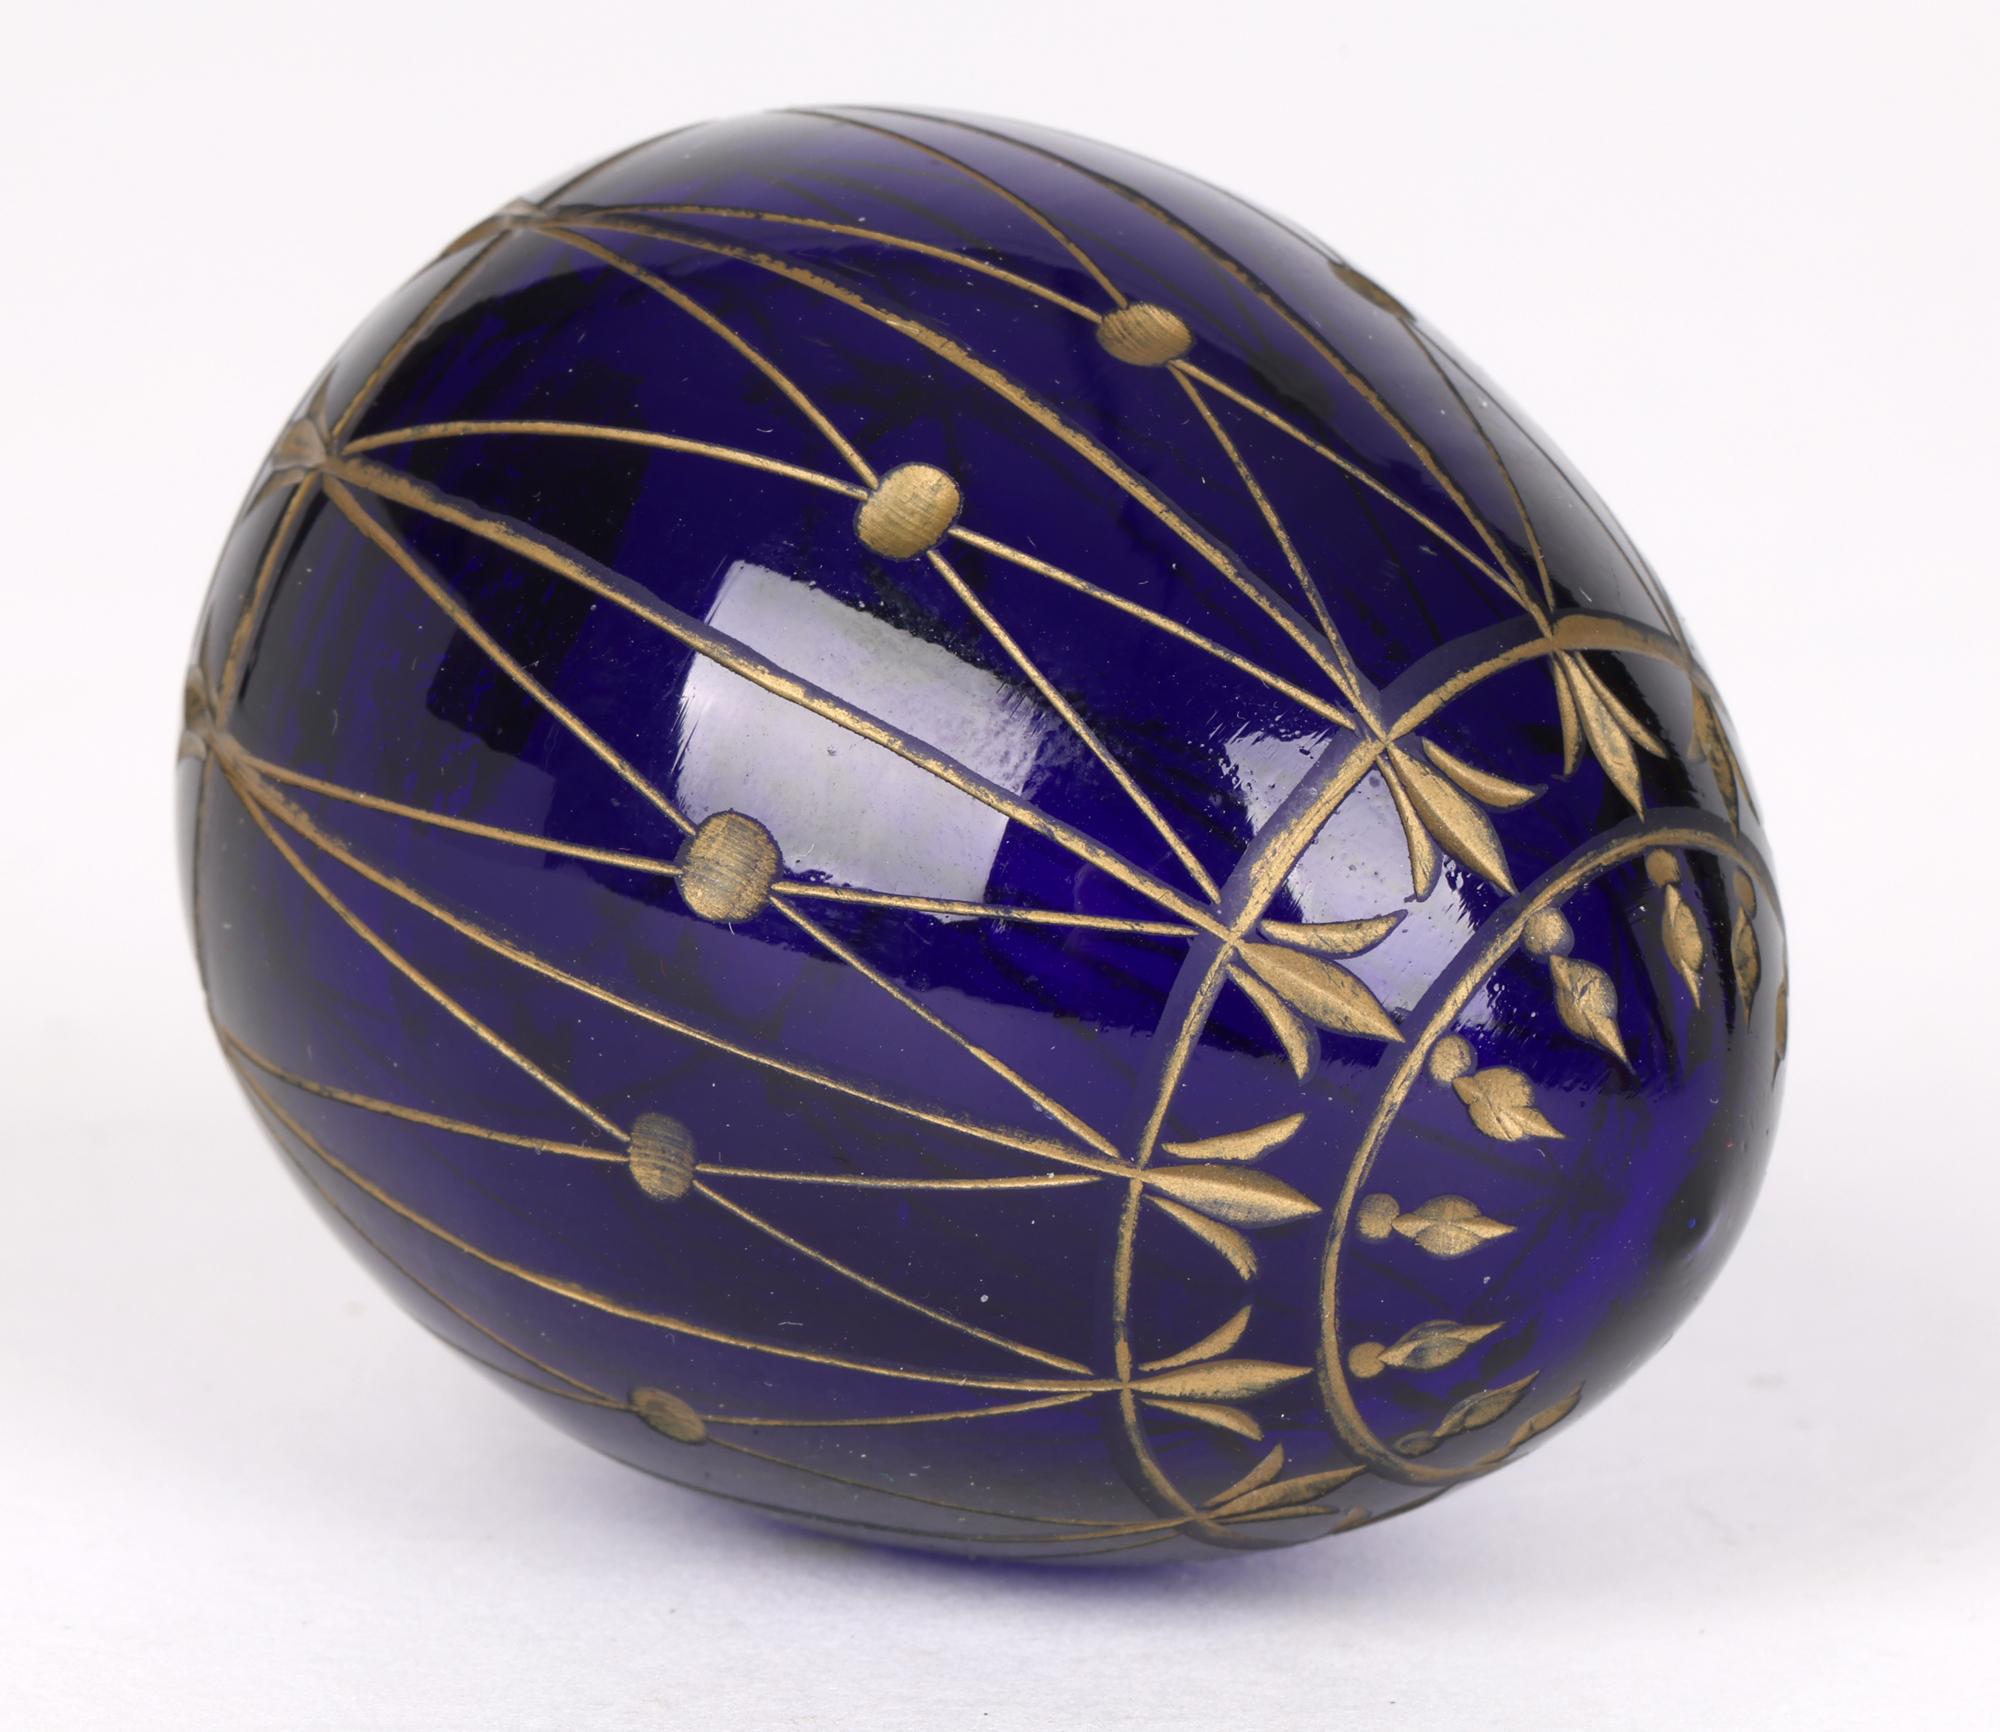 A fine quality vintage Russian hand-blown engraved cobalt blue glass egg with Faberge paper label to the base dating from the 20th century. The egg is finely made with a small flat base covered with a makers paper label. The body of the egg is